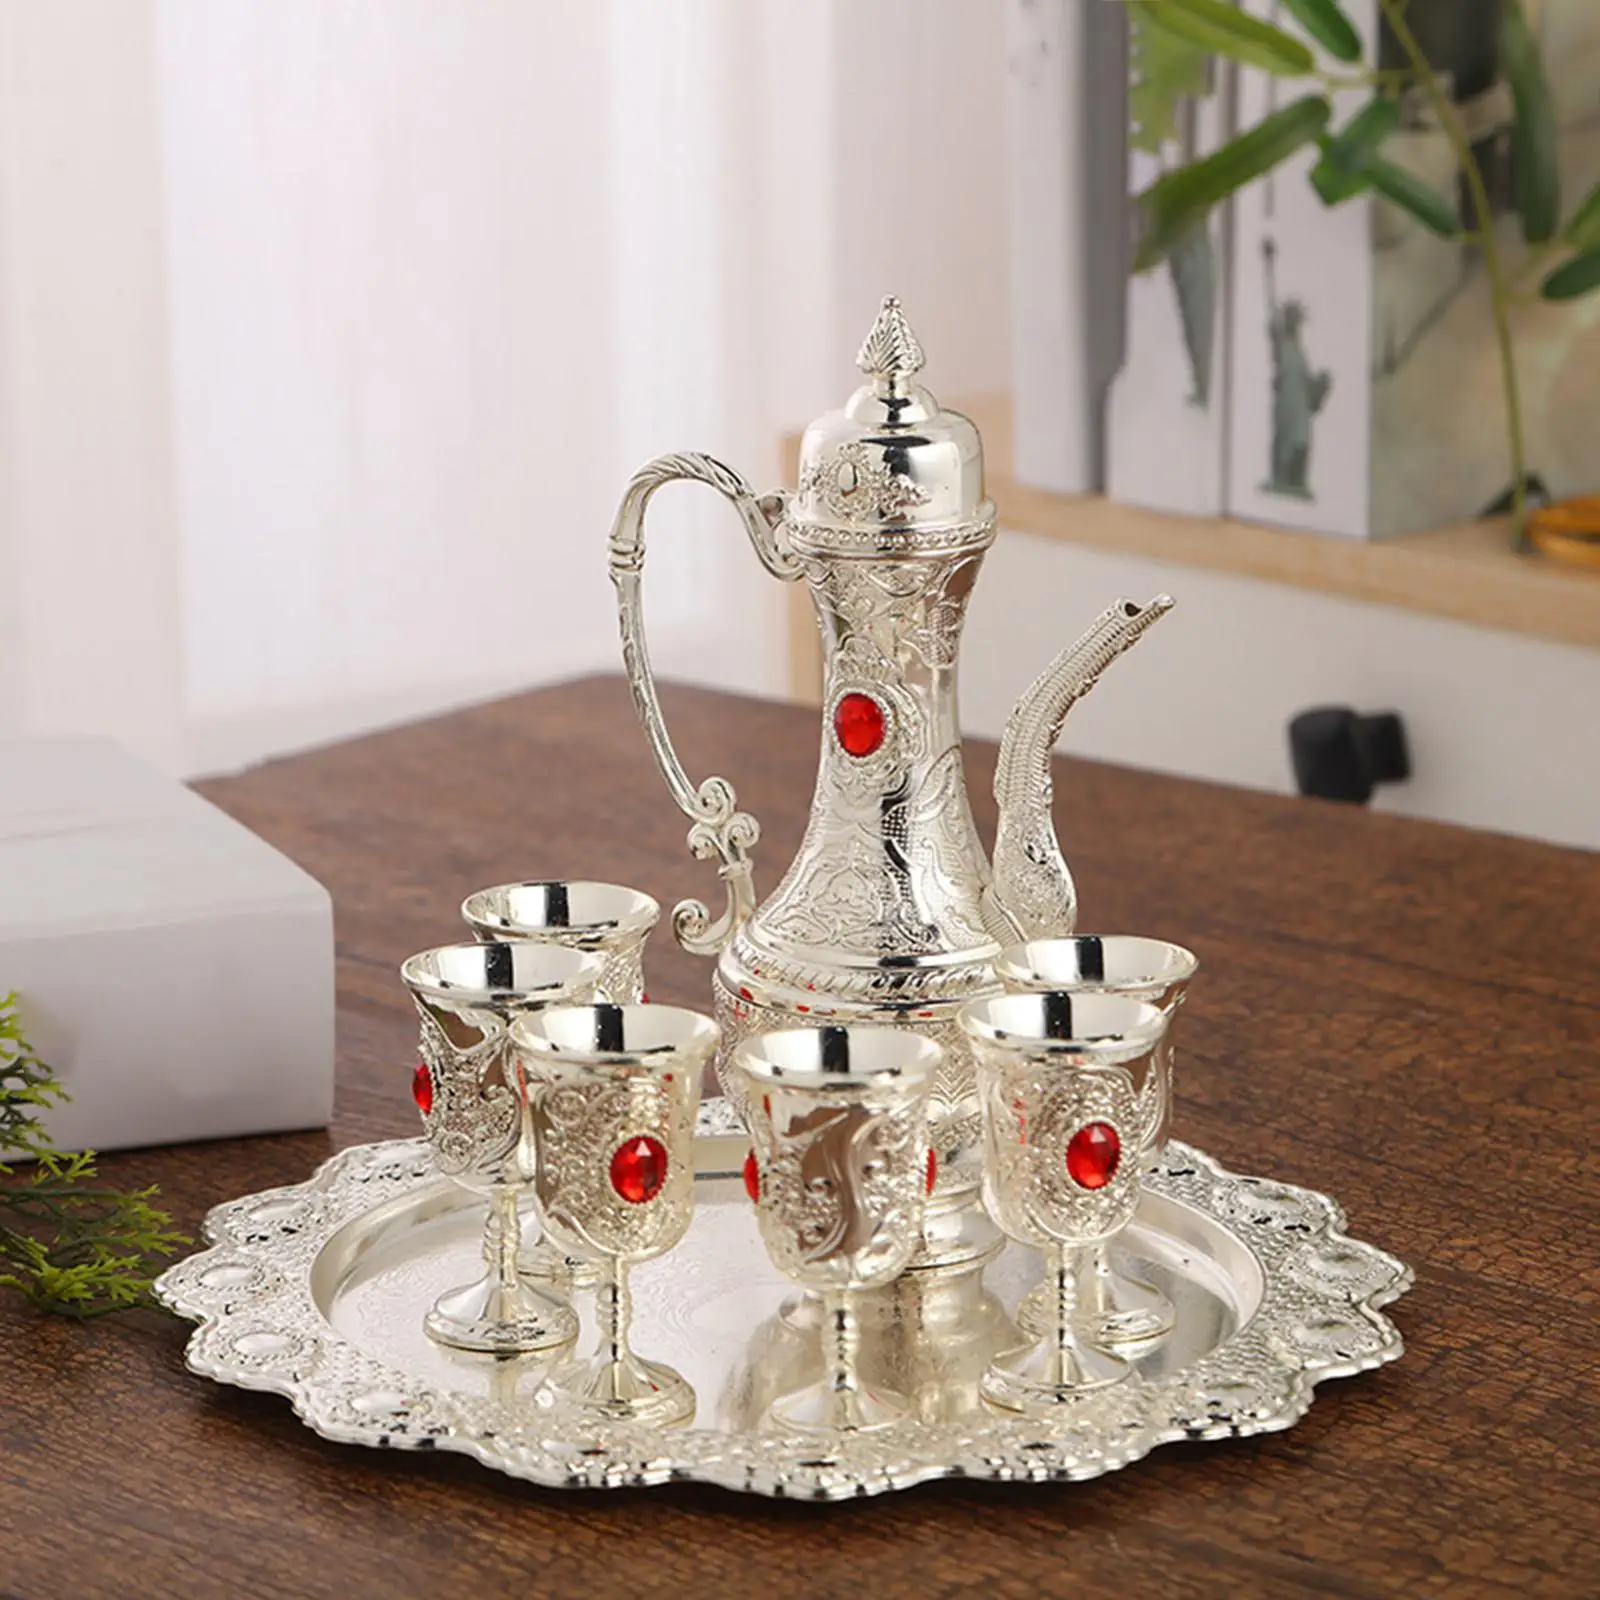 6Pcs Metal Wine Liquor Decanter Set with Tray Wine Glass Jug Set for Table Decoration